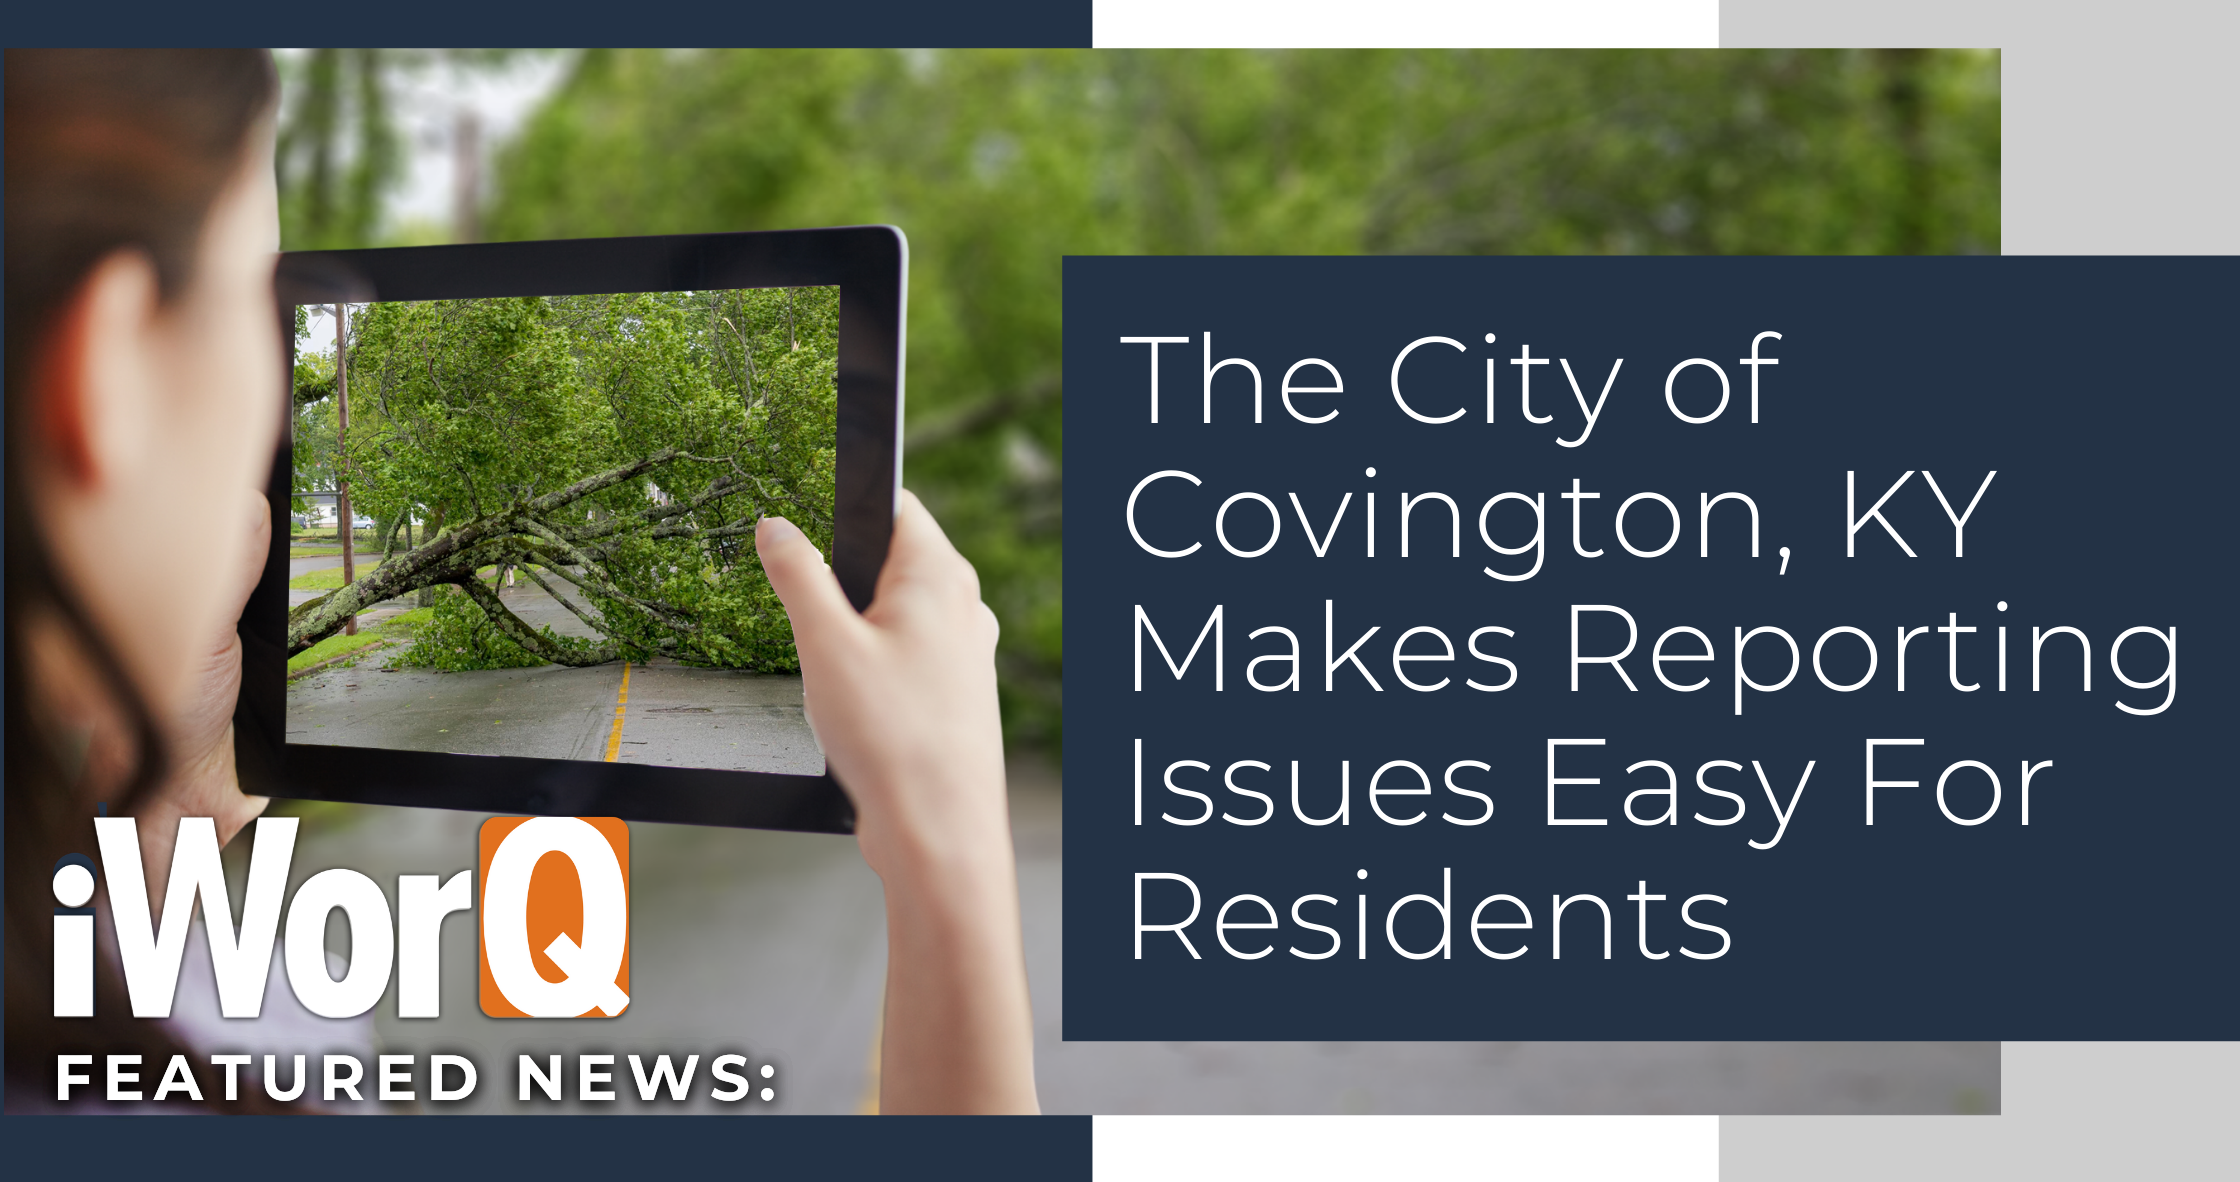 Featured image for “Covington, KY Makes Reporting Issues Easy For Residents”